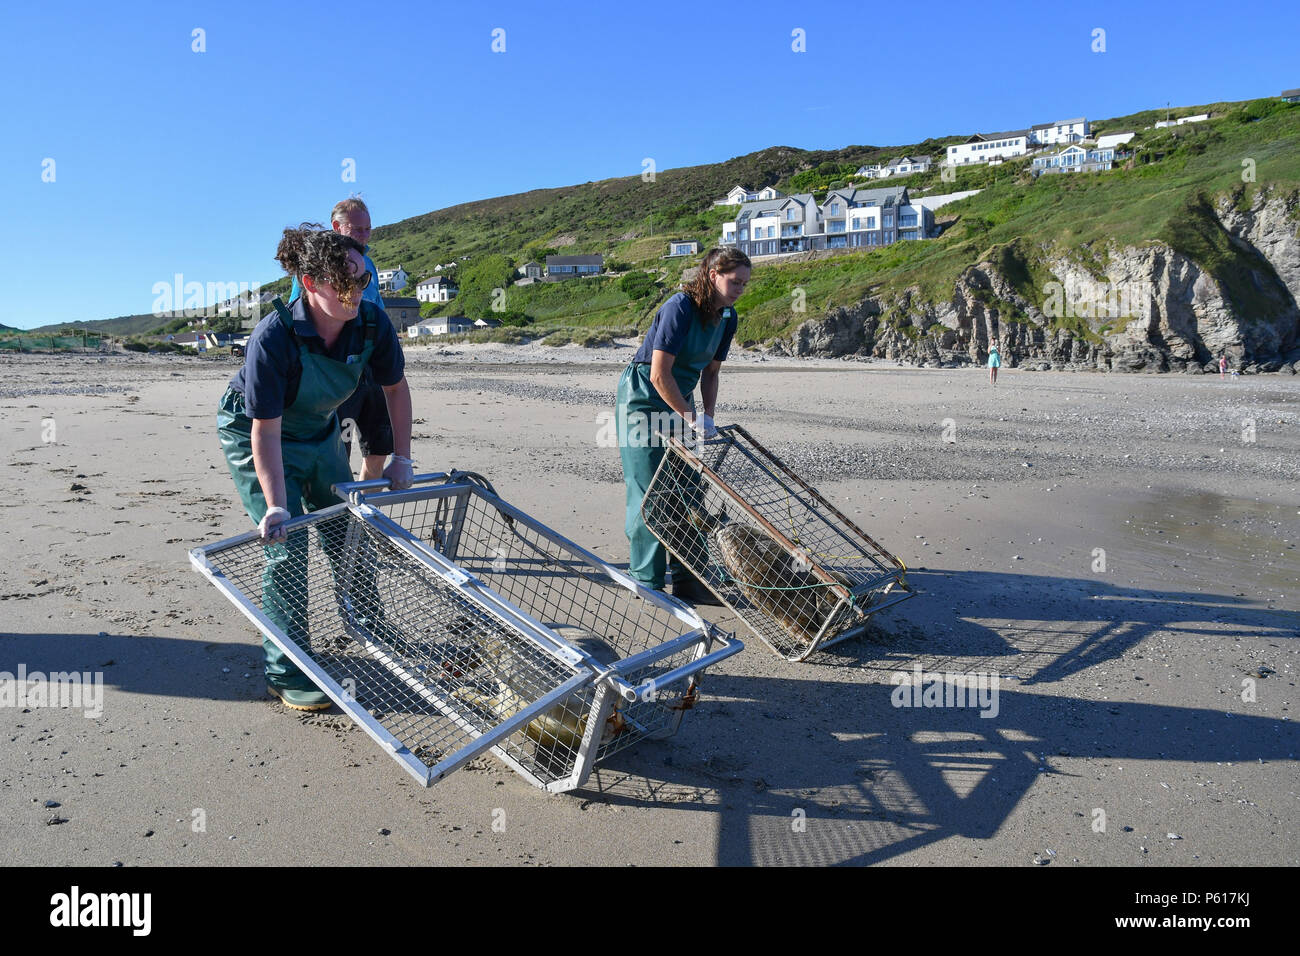 Porthtowan, Cornwall, UK. 28th June 2018. Megan Gunnell  from the Cornish seal sanctuary carrying out the final release of the season, or rescue seal Harry. Harry was rescued on the day of the Royal Wedding, hence the name,  with nylon netting wrapped round his head and body - you can still see the scars. Megan is a recent graduate in animal behaviour. Megan and Harry on far right. Credit: cwallpix/Alamy Live News Stock Photo